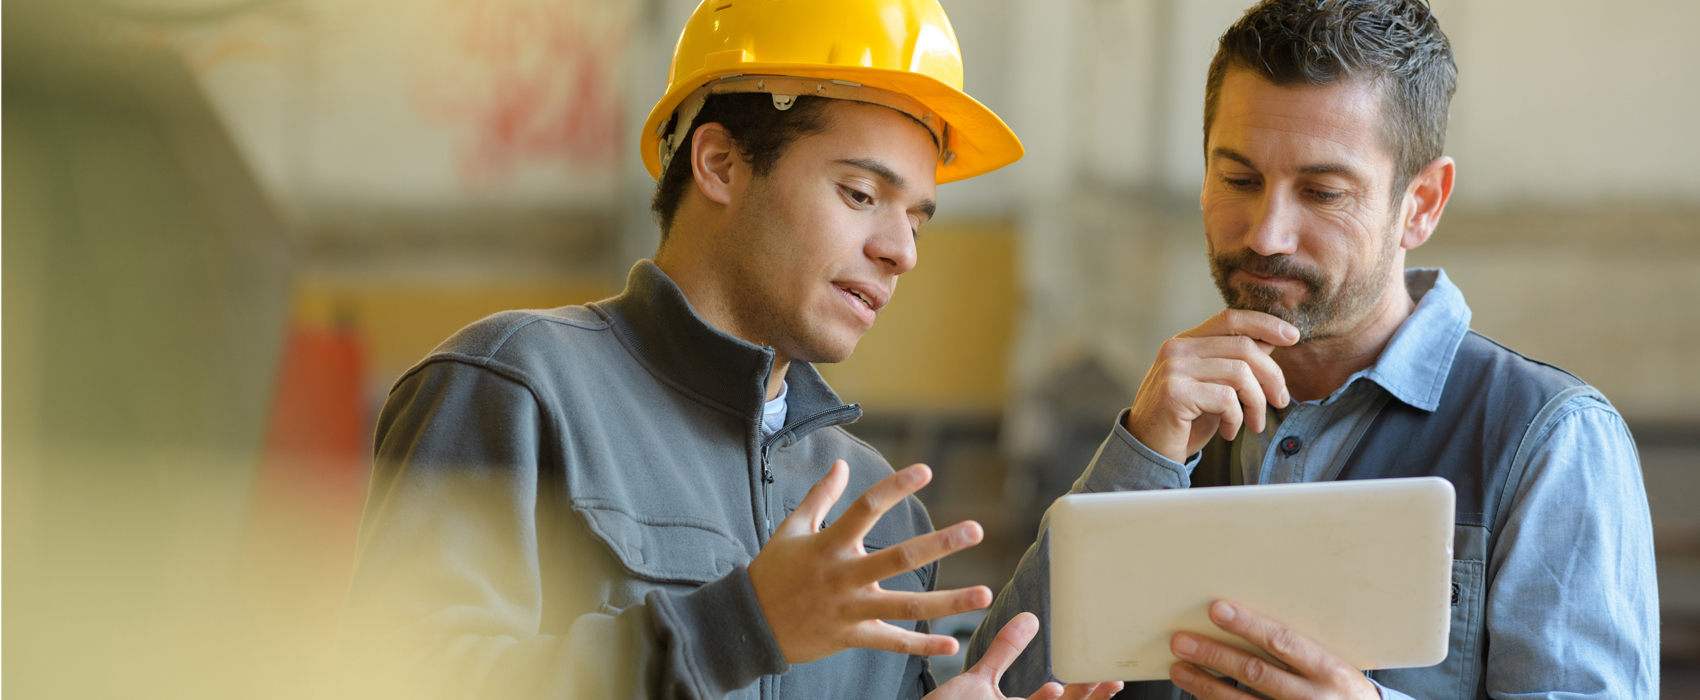 How to improve health and safety in the workplace - 4 proven steps